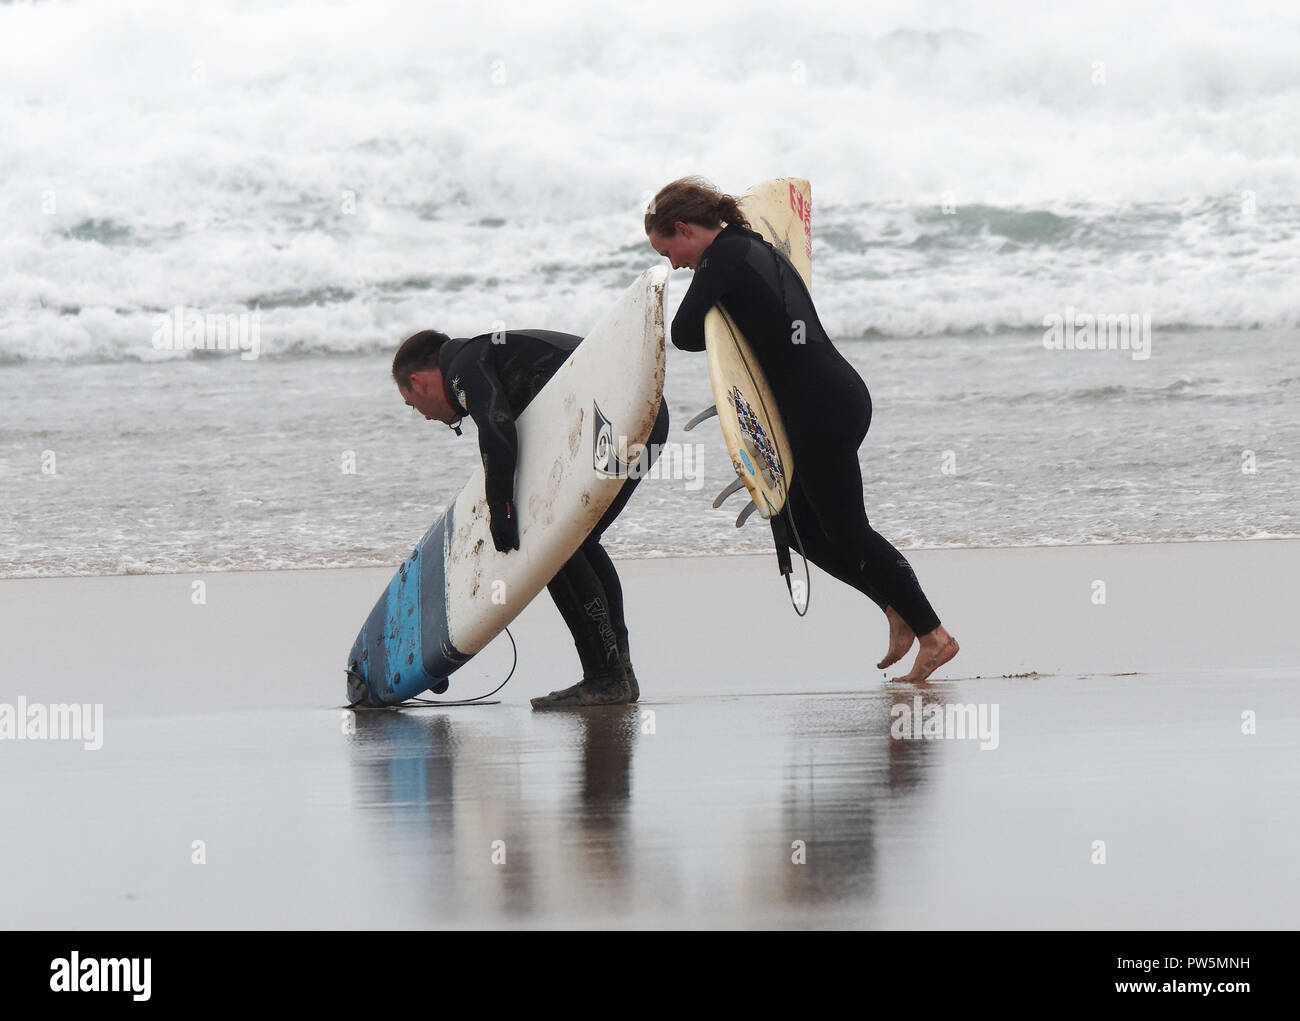 Newquay, Cornwall. 12th Oct 2018. UK Weather, British Universities and Colleges Sports organization postpone the first day of UK`s largest surf contest as to Storm Callum conditions at Fistral Beach.   Fistral Bay.12th September, 2018  Robert Taylor/Alamy Live News.  Newquay, Cornwall, UK. Credit: Robert Taylor/Alamy Live News Stock Photo